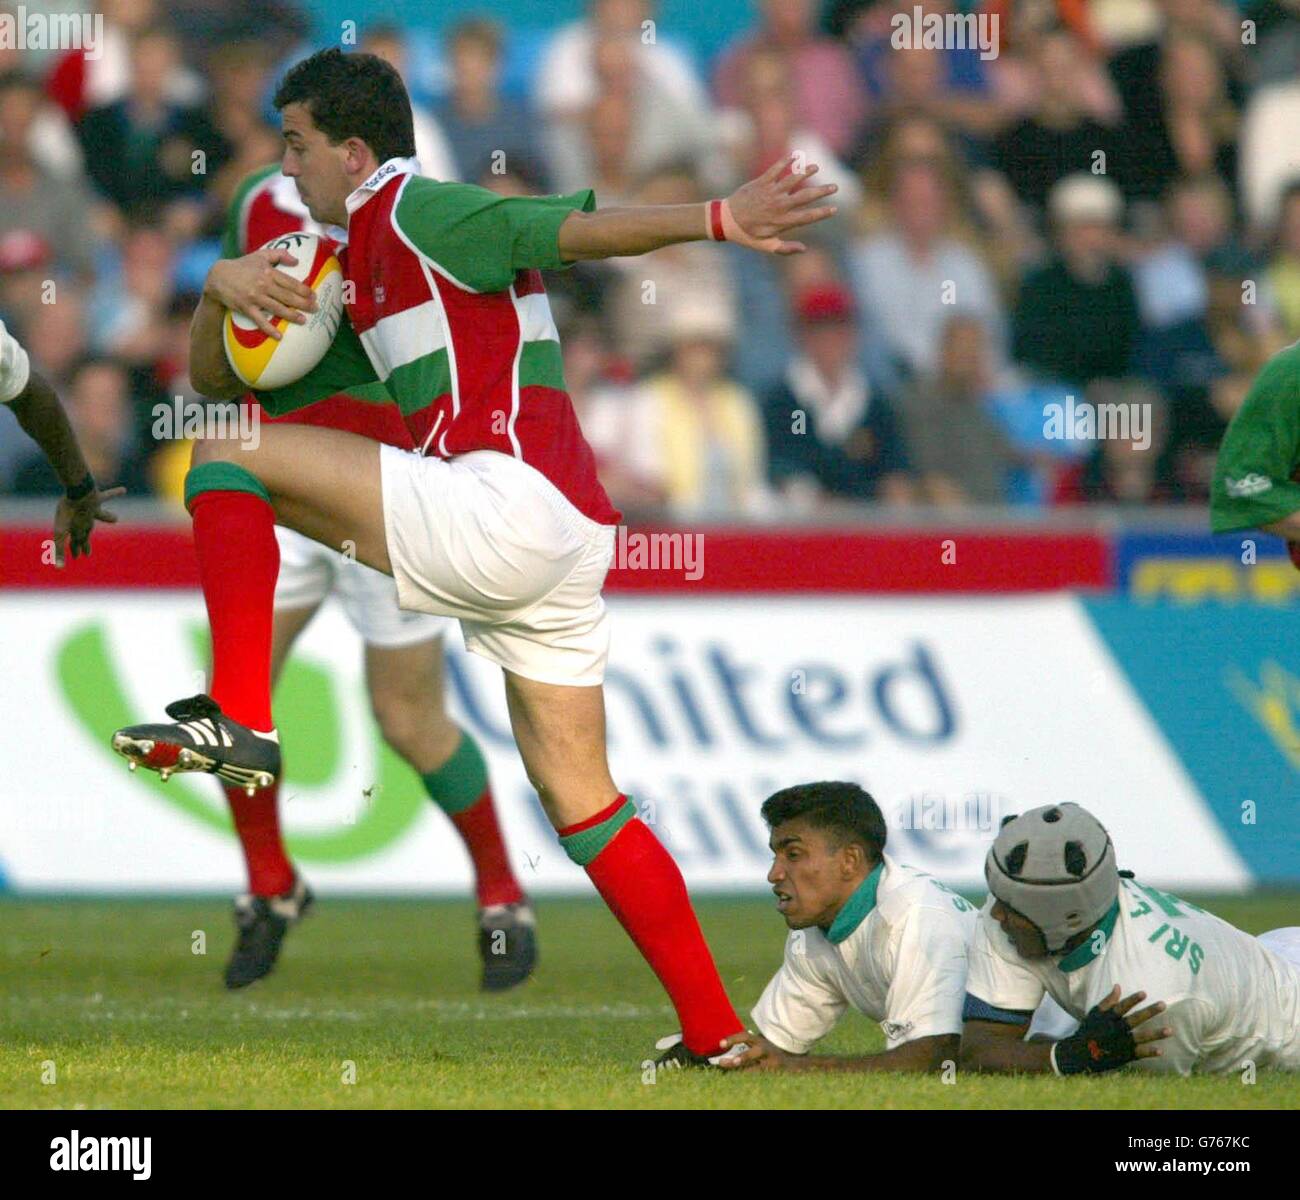 Wale's Emyr Lewis rides the Sri Lankan tackle during a pool match at the Rugby 7's at the 2002 Commonwealth Games in Manchester. Stock Photo